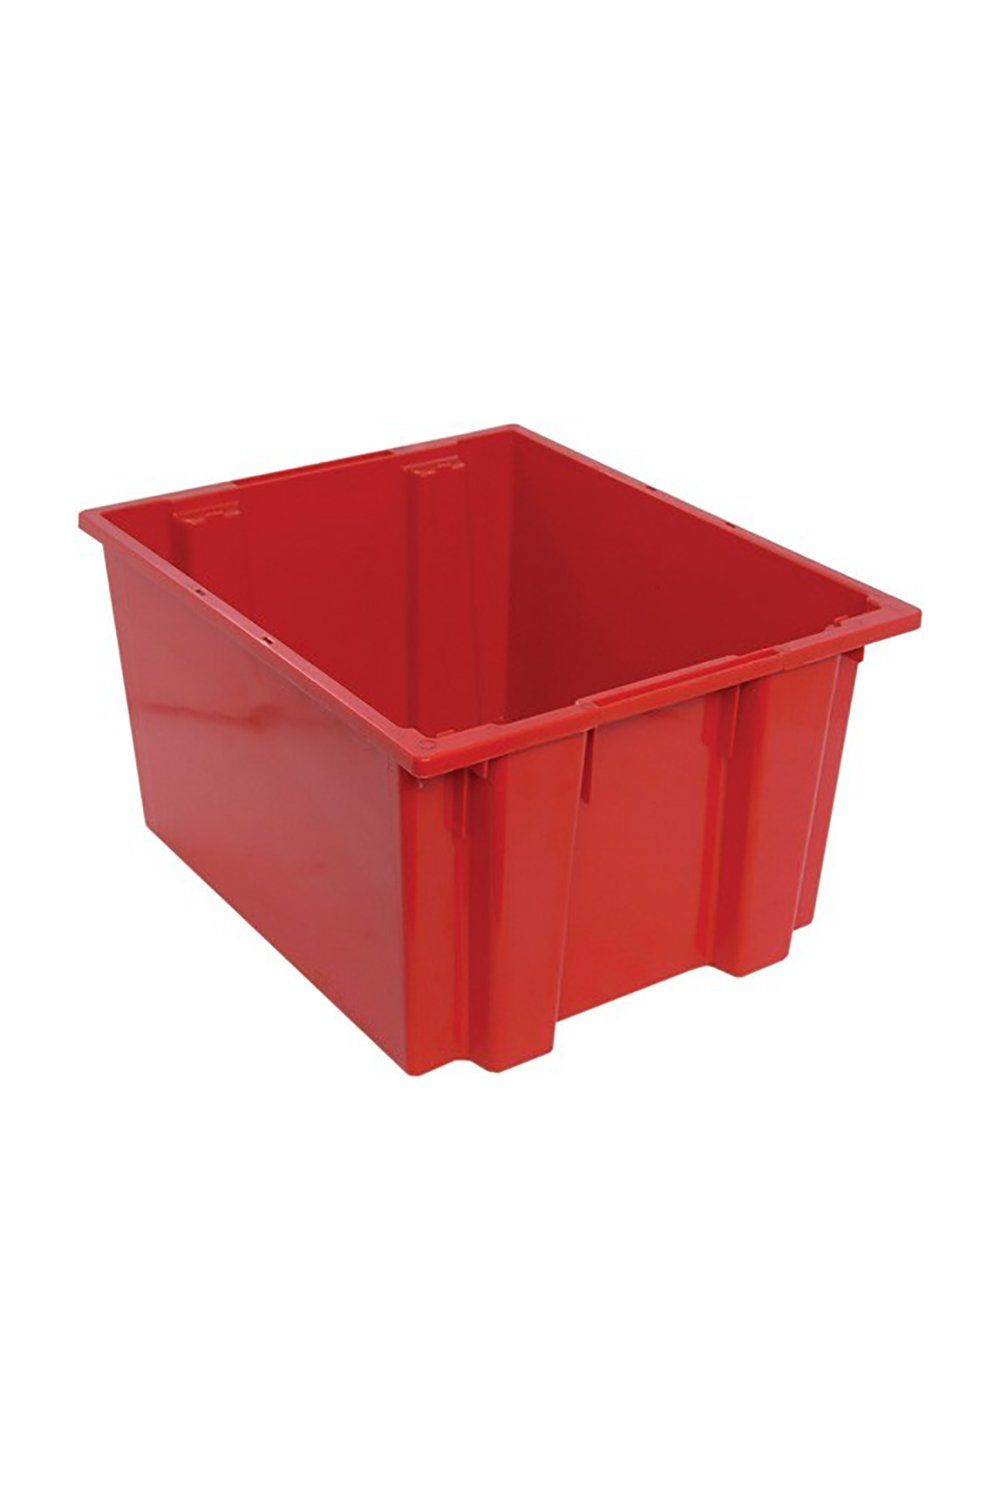 Stack and Nest Tote Bins & Containers Acart 23-1/2"L x 19-1/2"W x 13"H Red 